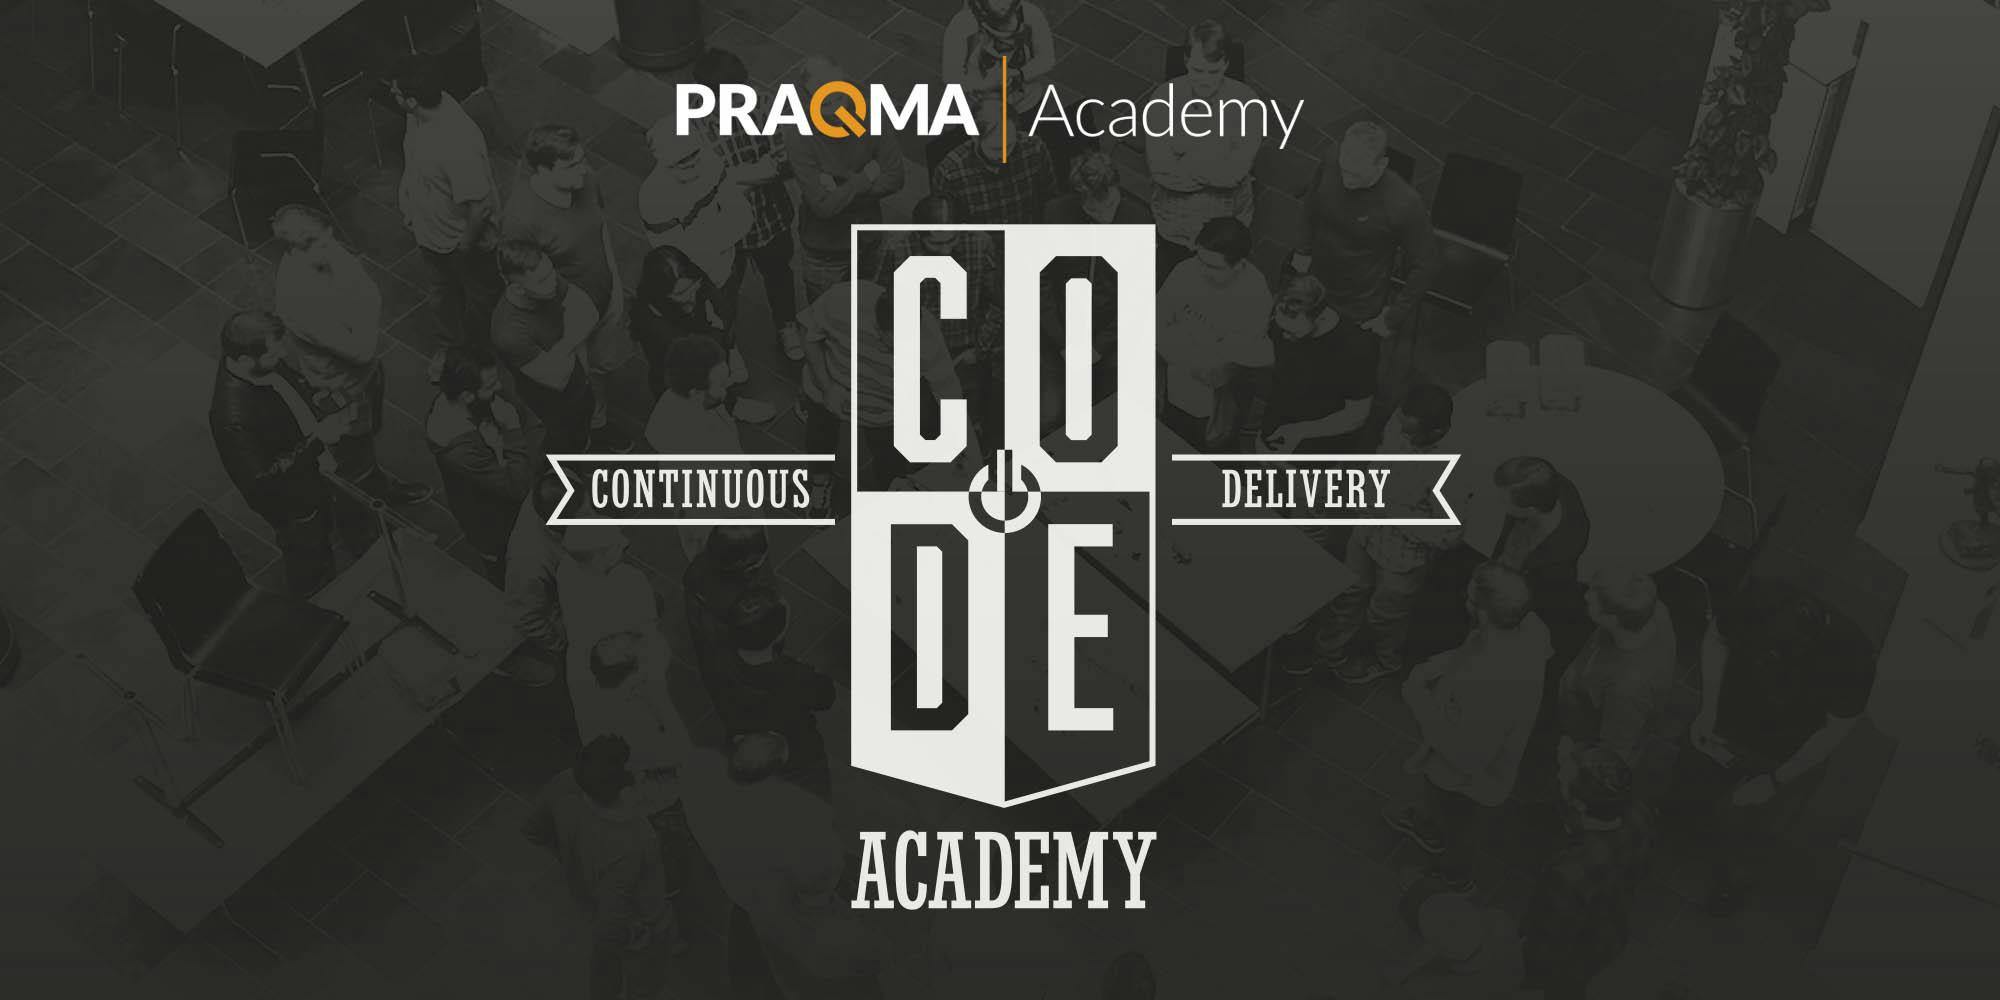 Continuous Delivery Academy 2018 - Oslo